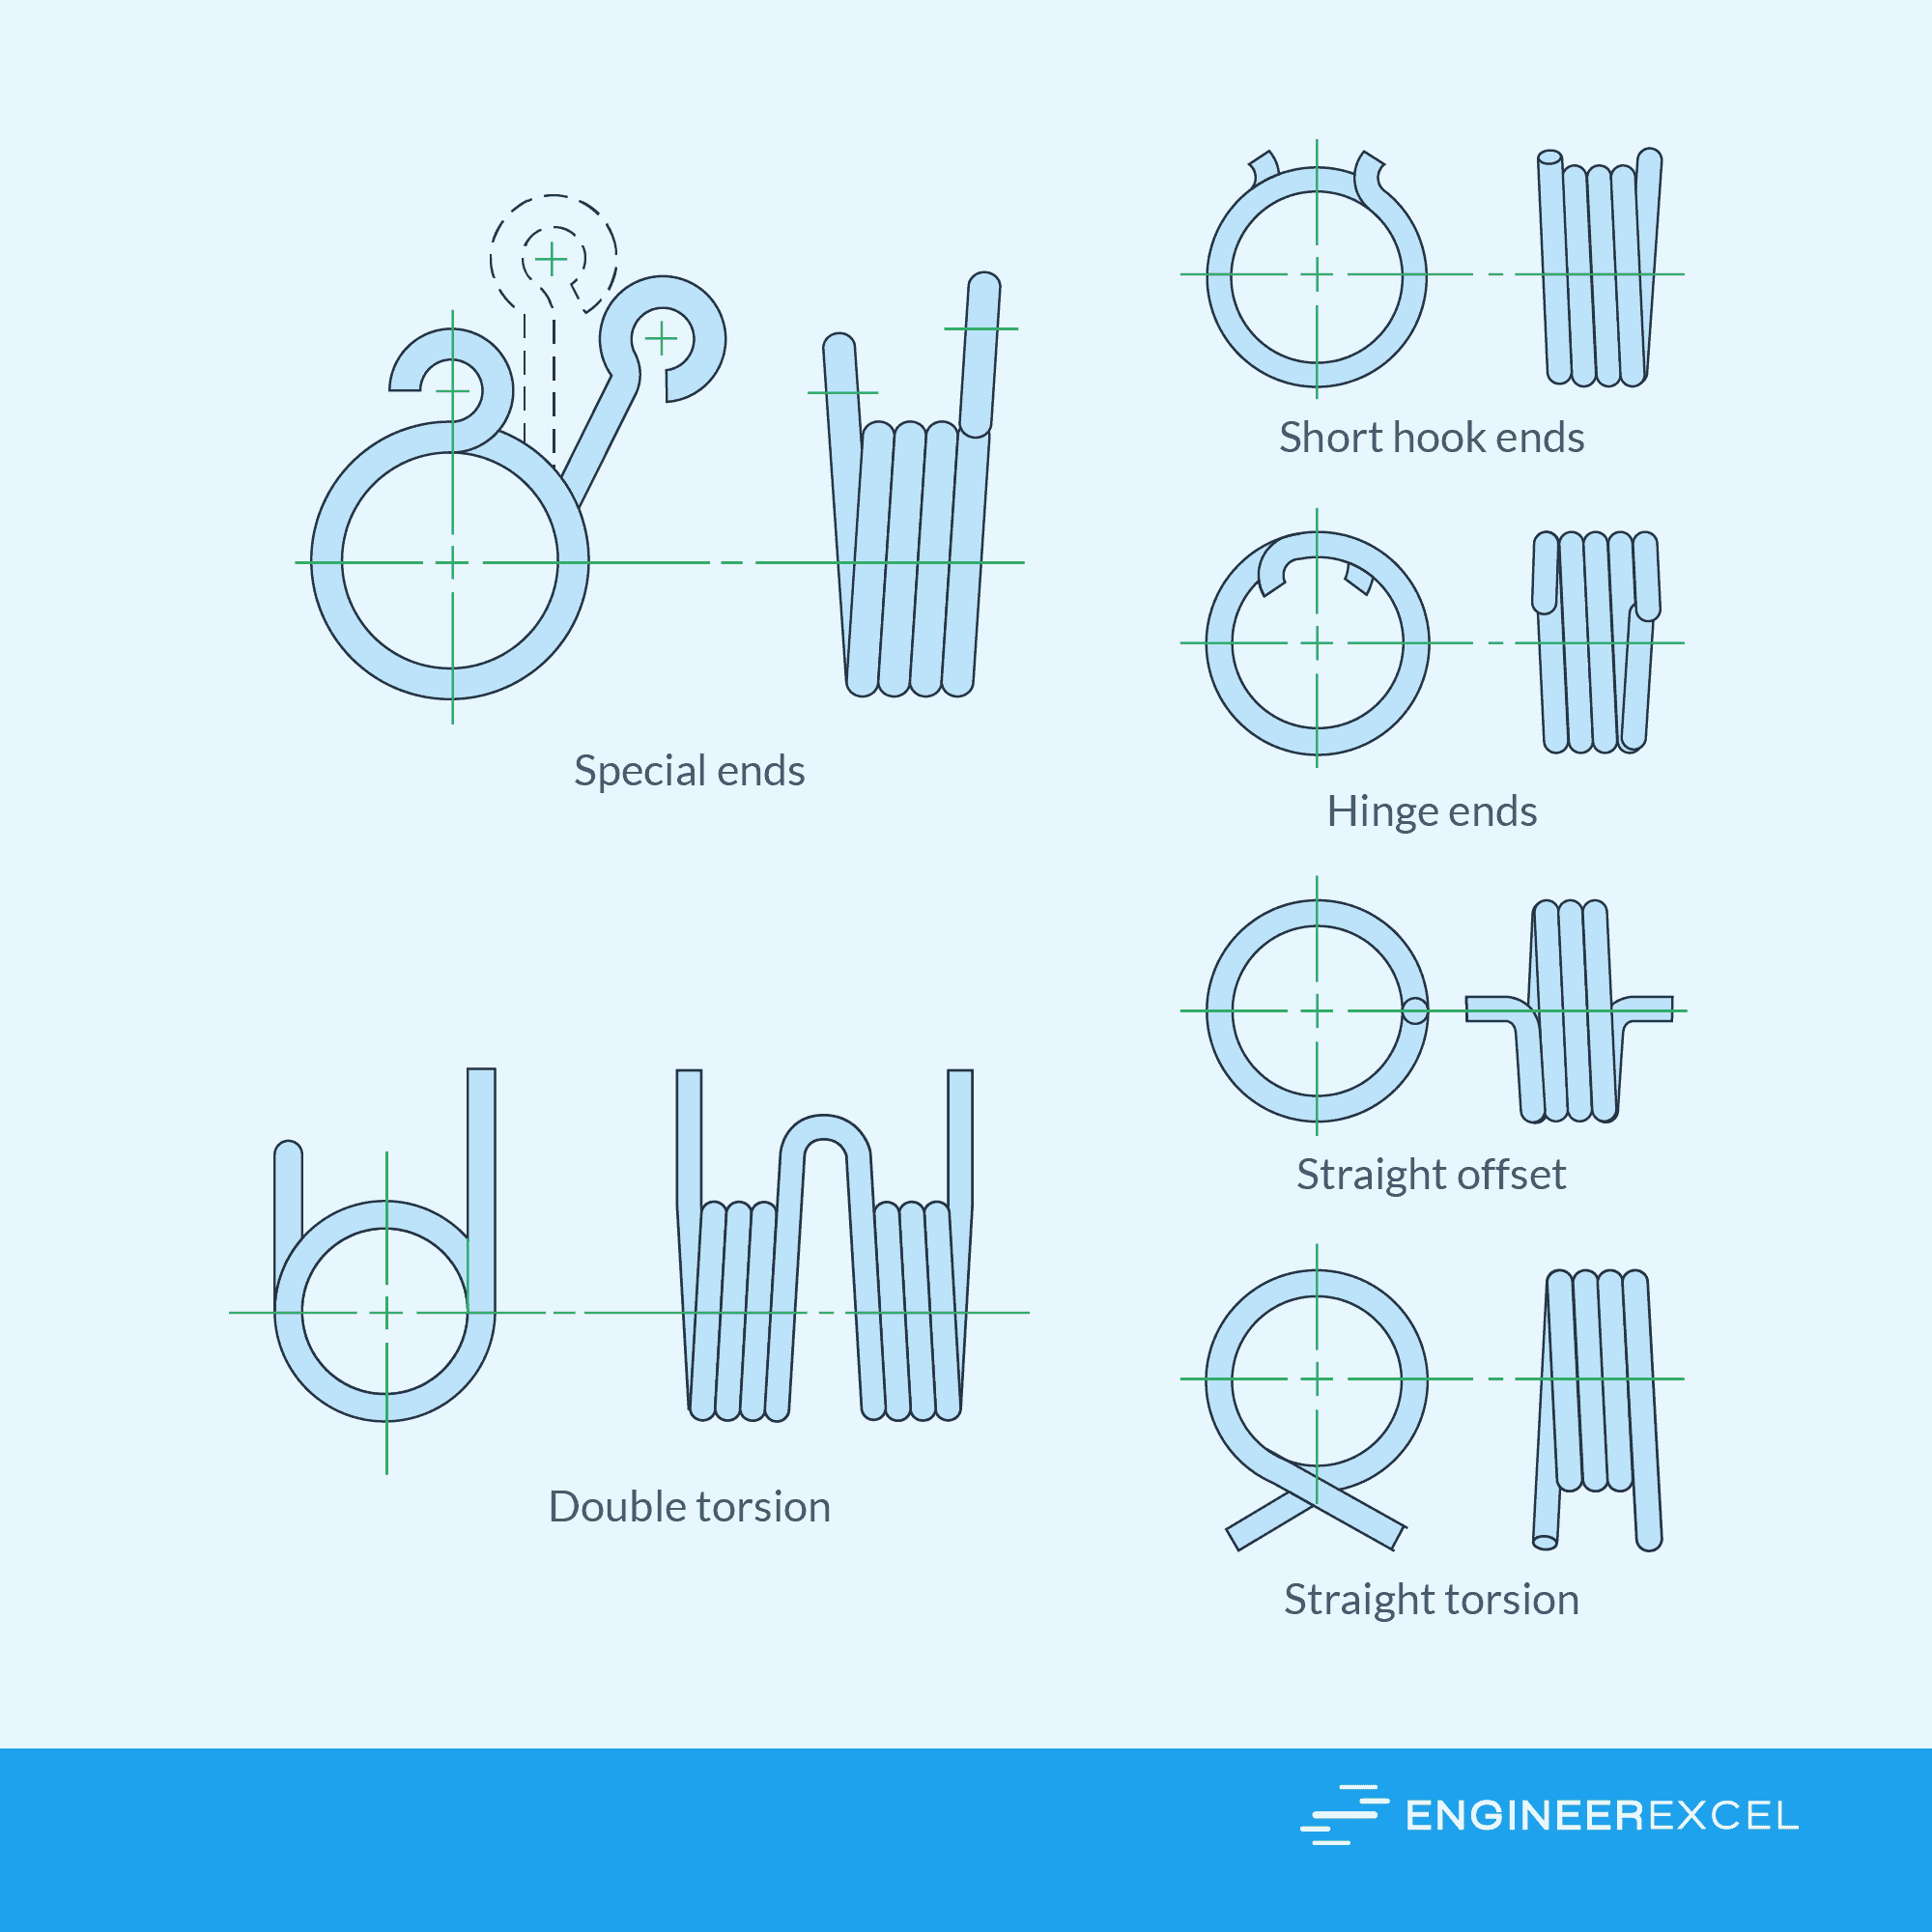 Different configurations of torsion springs